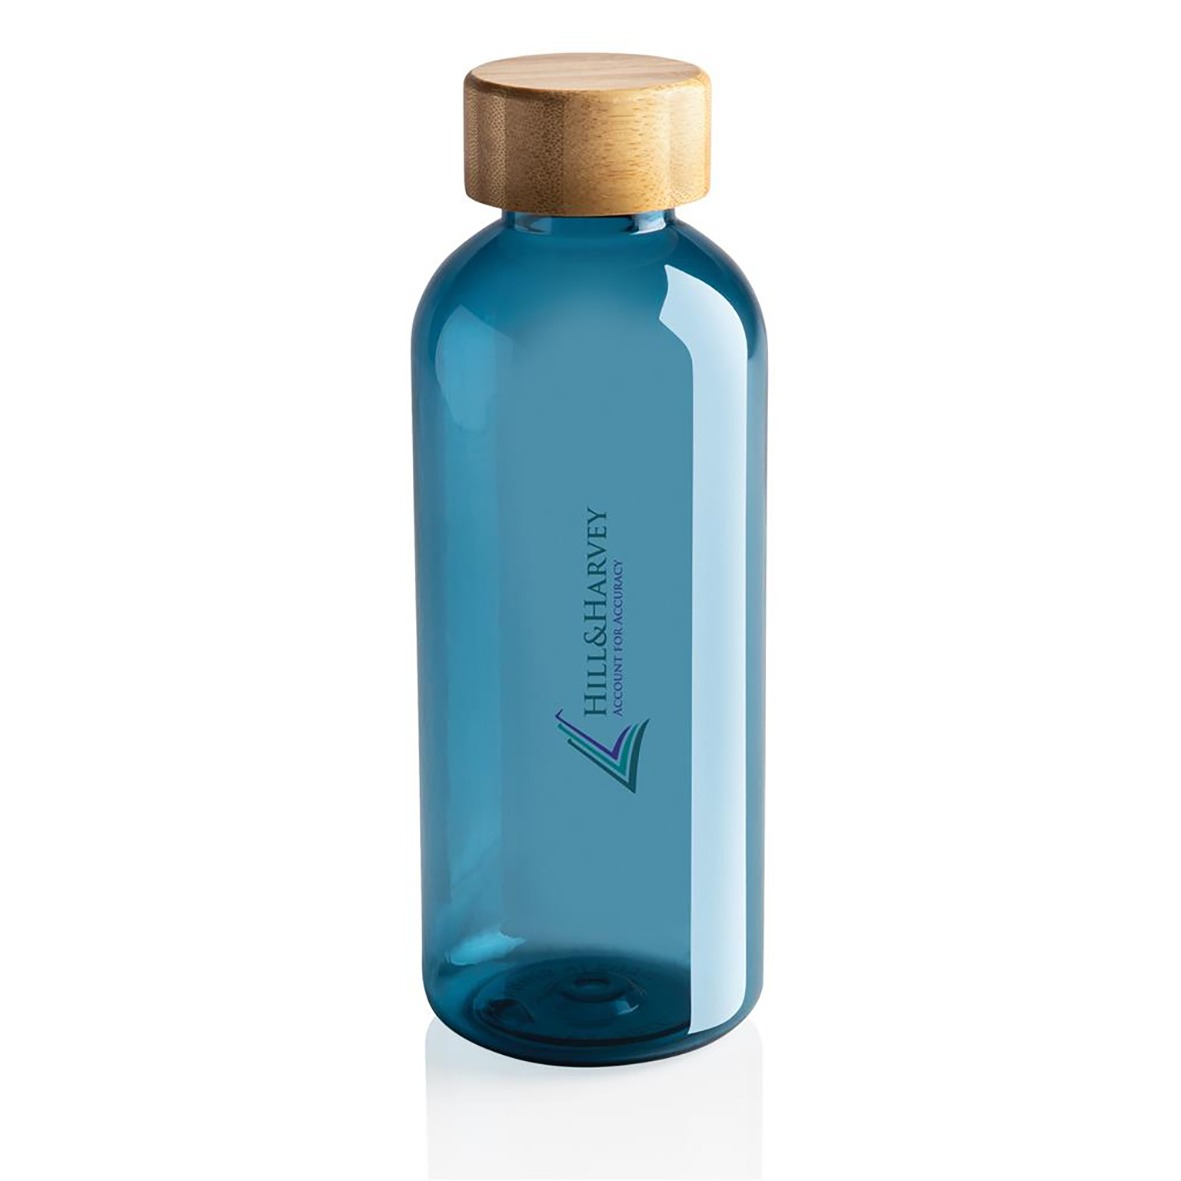 Bouteille eau recycle bambou personnalise-3